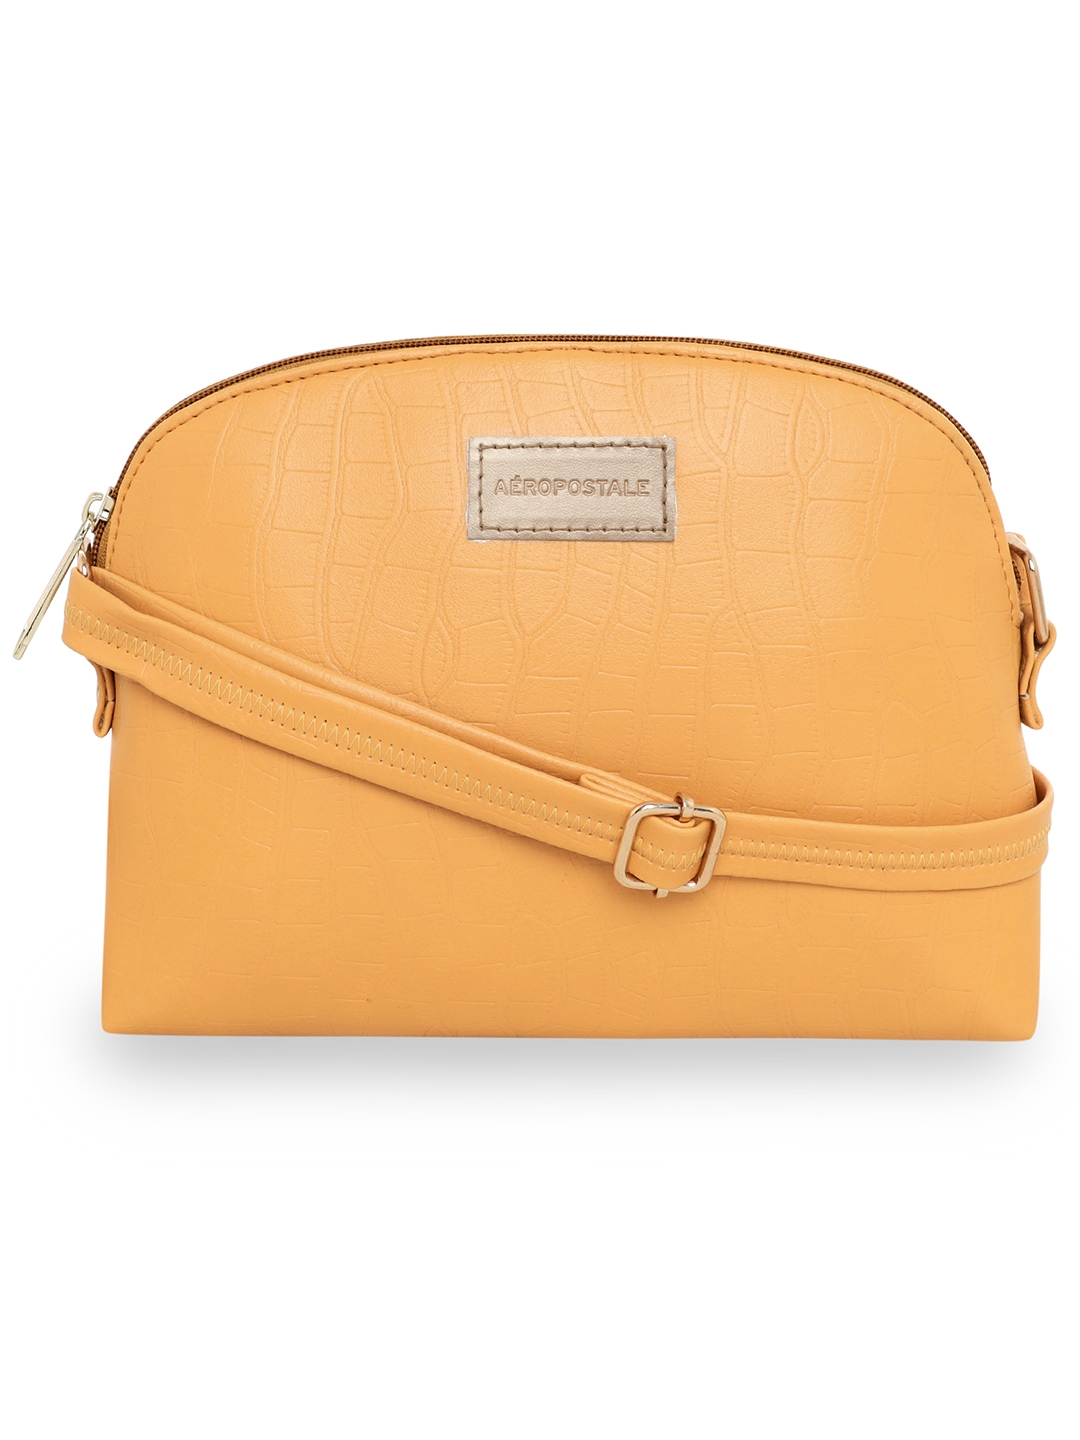 Aeropostale Textured Kylie PU Sling Bag with non-detachable strap (Mustard)